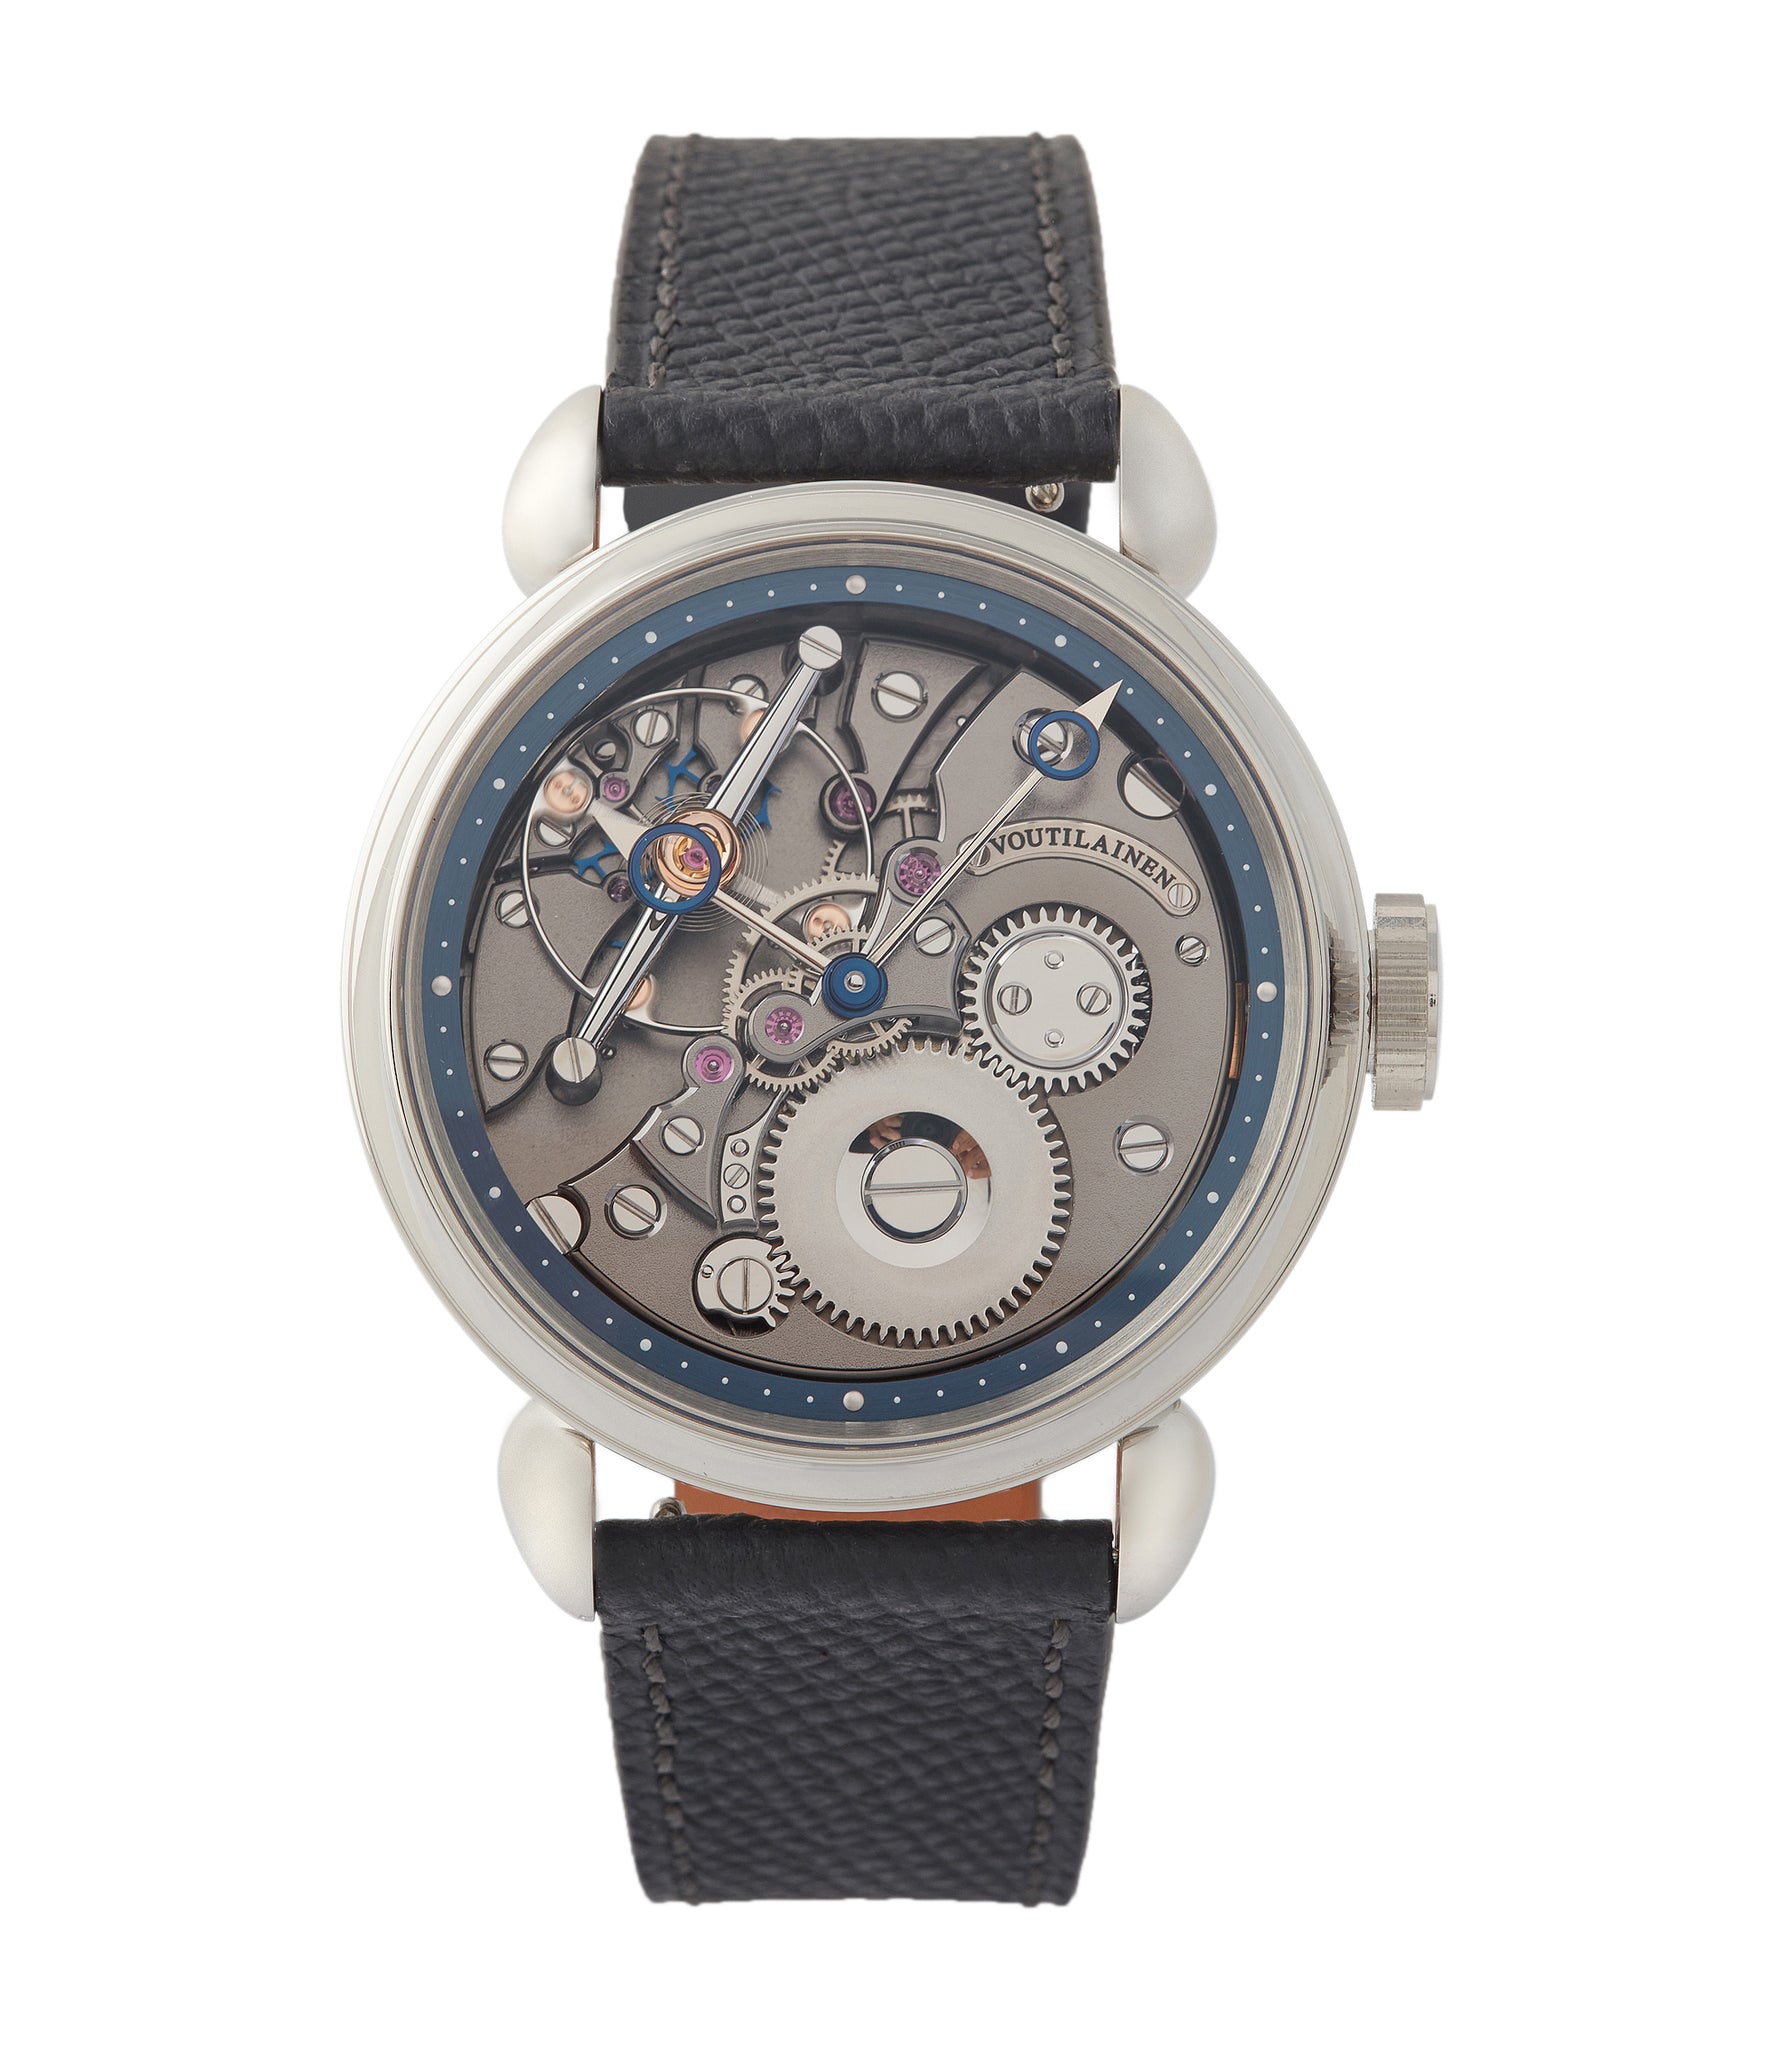 shop pre-owned Kari Voutilainen 28PI Limited Edition platinum inverted rare pre-owned watch independent watchmaker for sale A Collected Man London UK speciliast of rare watches